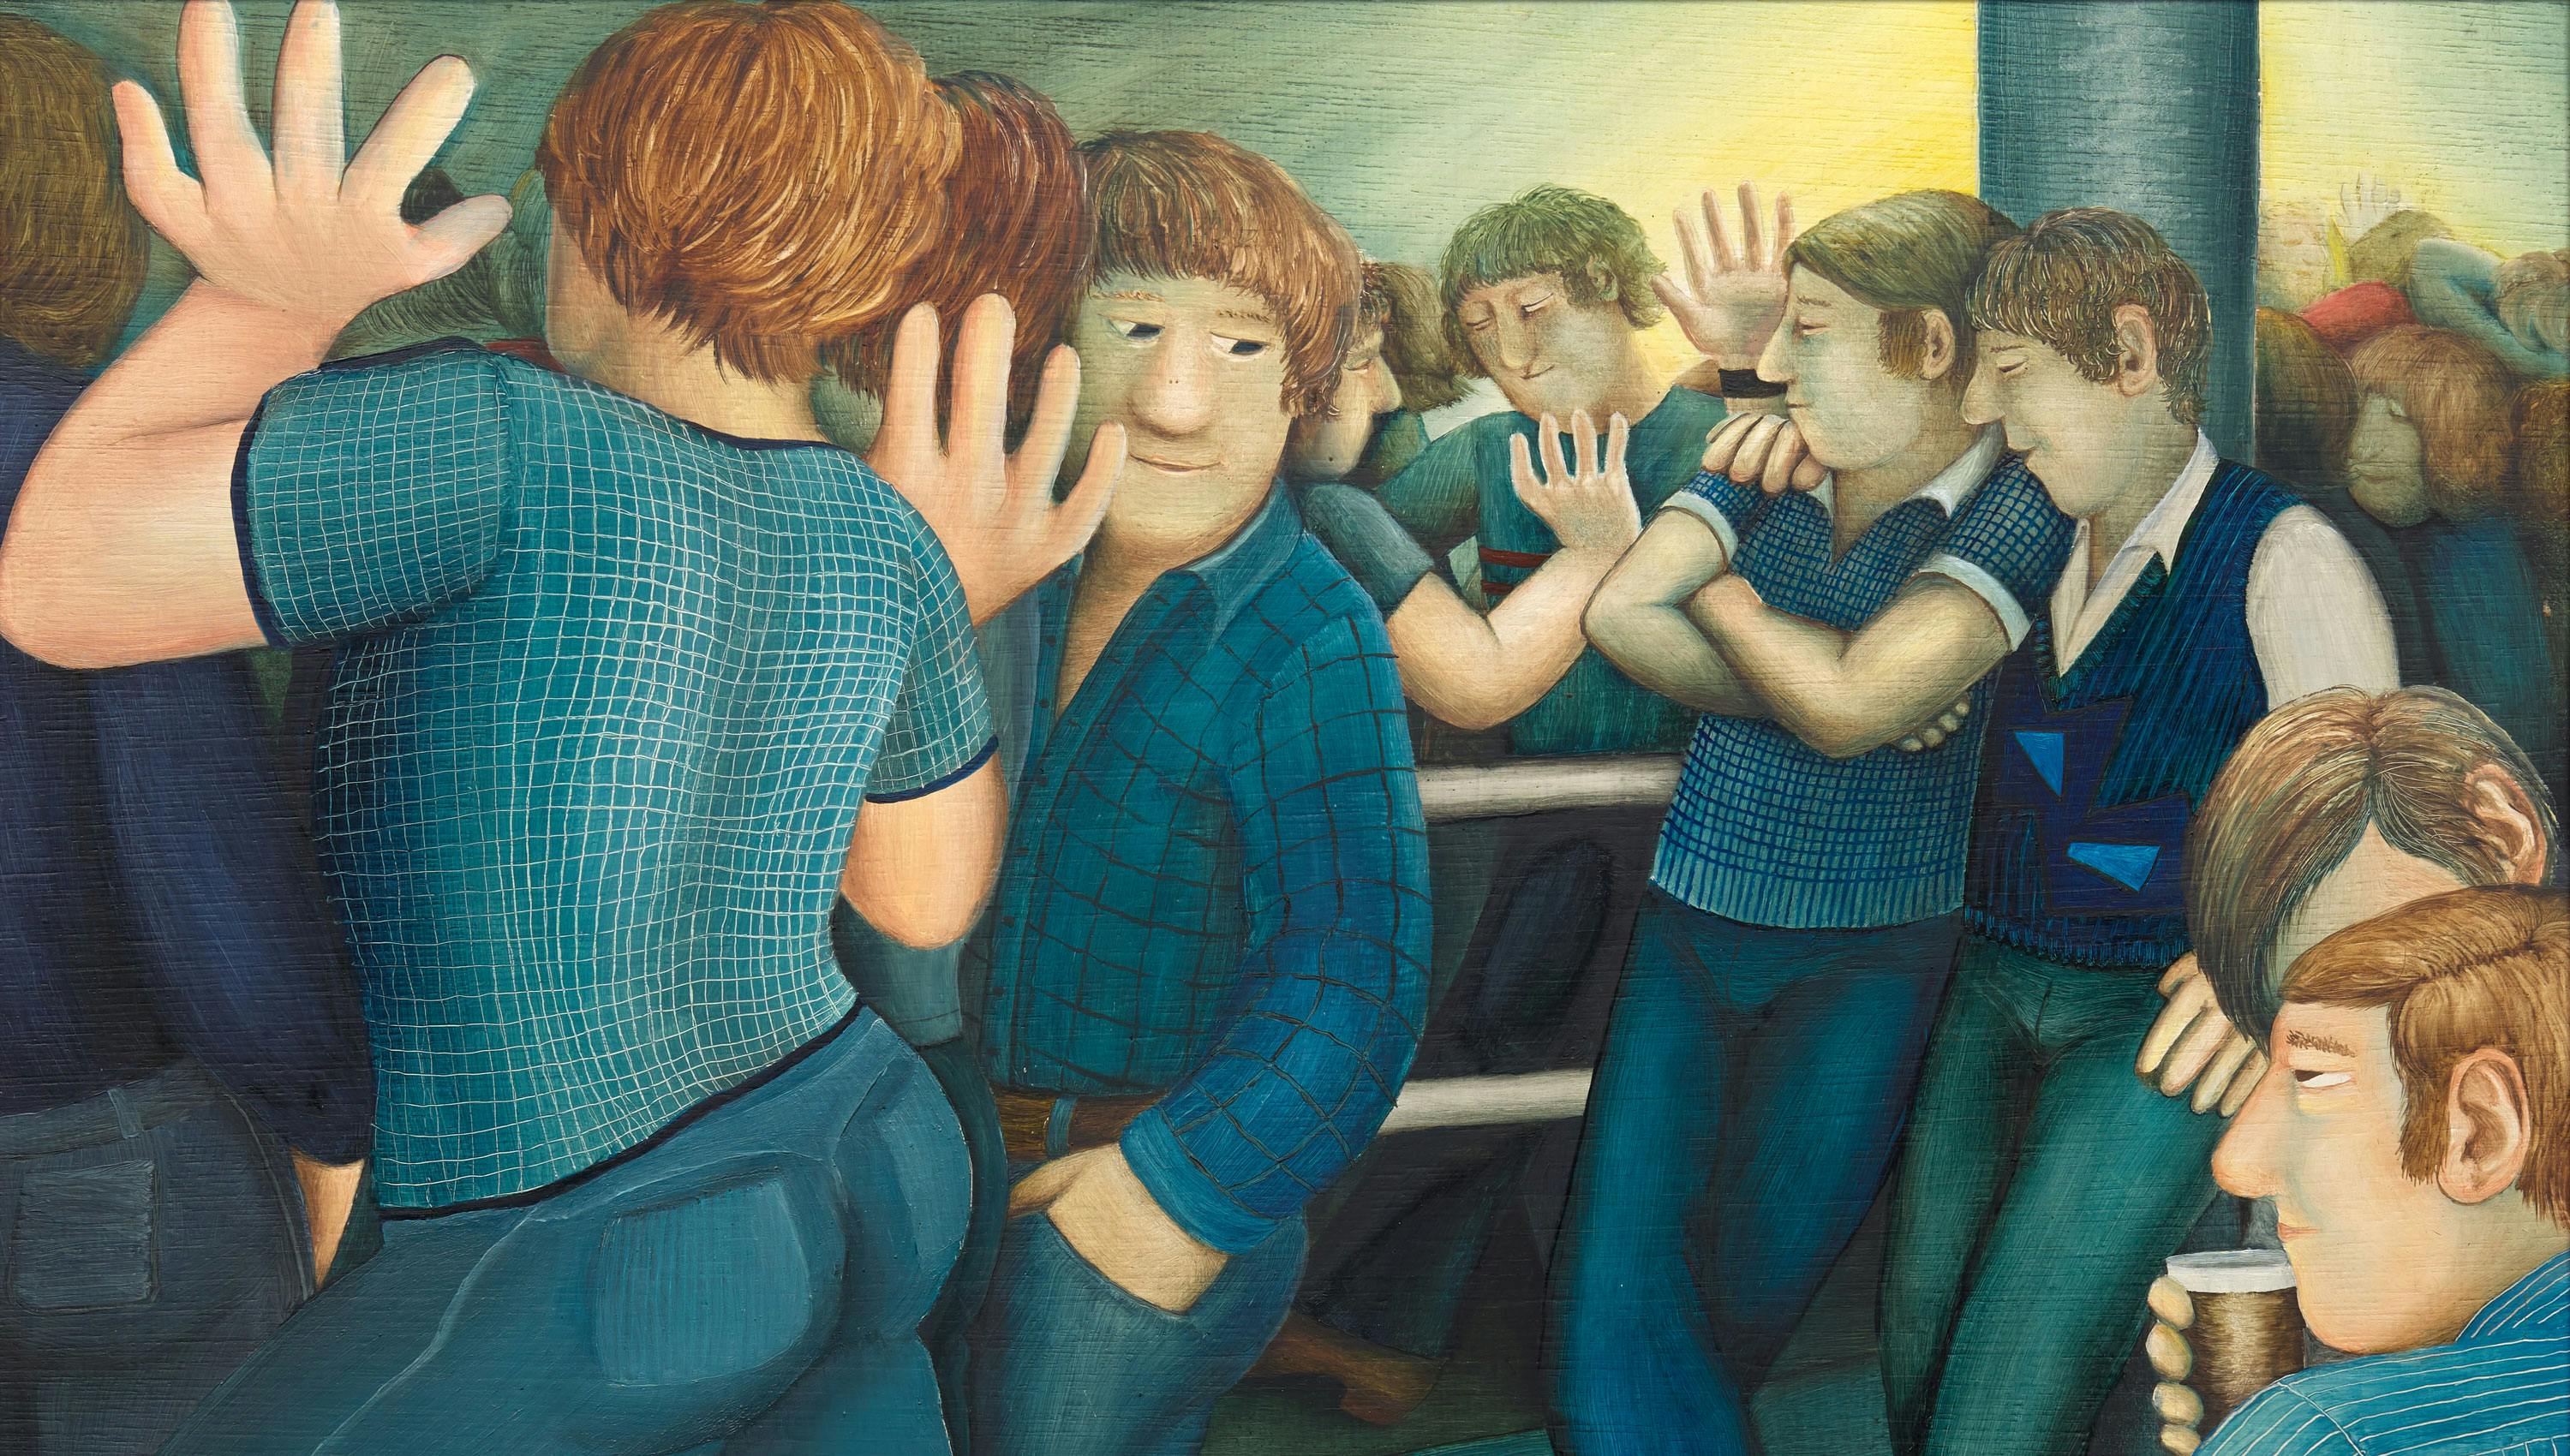 a painting of a nightclub interior with men dancing and wearing tight-fitting jeans. The painting's protagonist is a man with choppy hair looking over his shoulder at another man who catches his eye.